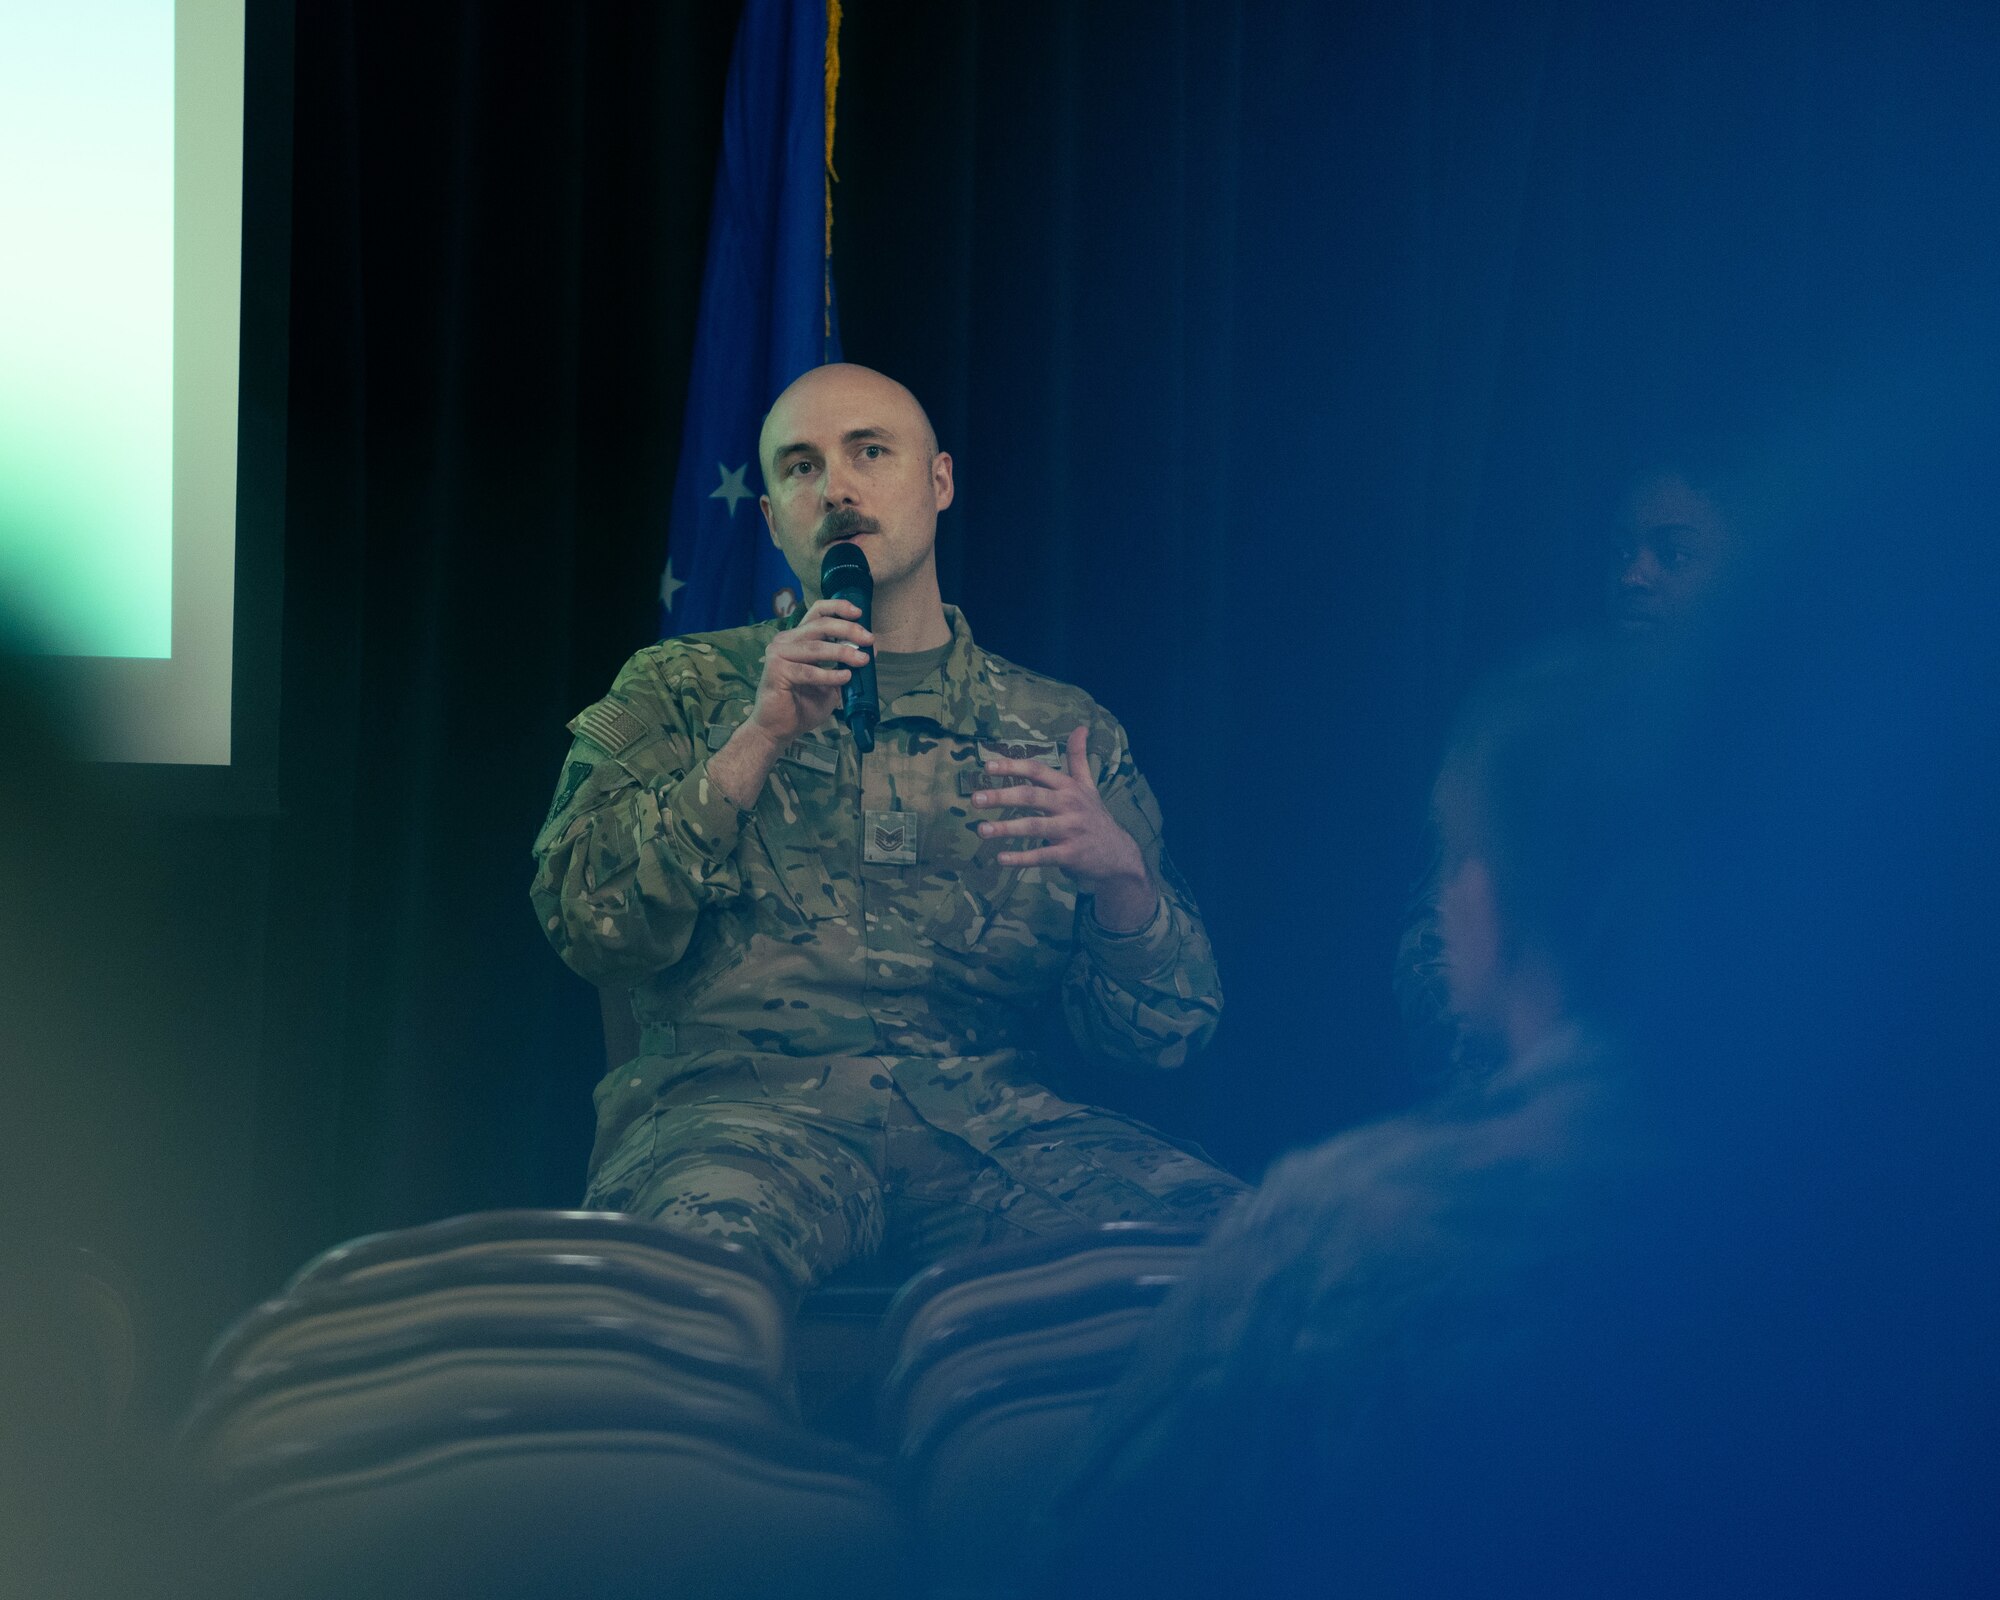 U.S. Air Force Tech. Sgt. Marcus Strait, 27th Special Operations Group enlisted executive, discusses ways Airmen can become mentors at the 2nd Annual Women’s Leadership Symposium, Cannon Air Force Base, N.M., on March 15, 2024. The Women’s Leadership Symposium’s mission is to send a message of professional development, inclusivity and commitment aiming to inspire and empower everyone at Cannon AFB. (U.S. Air Force Photo by Senior Airman Mateo Parra)